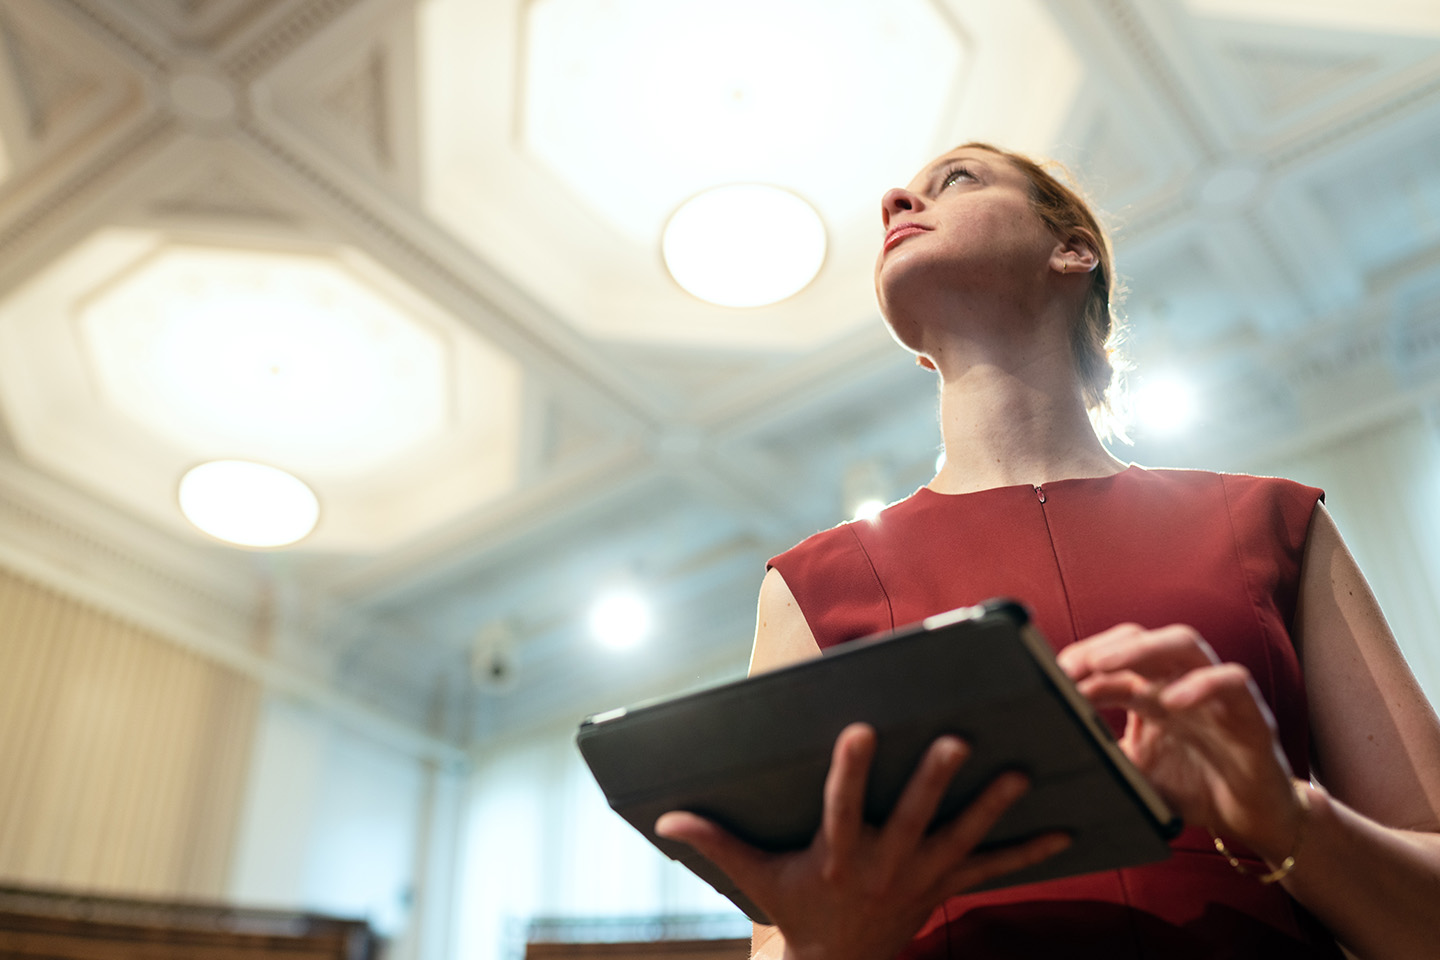 Woman with a red top on looking up at a stately ceiling holding a work tablet